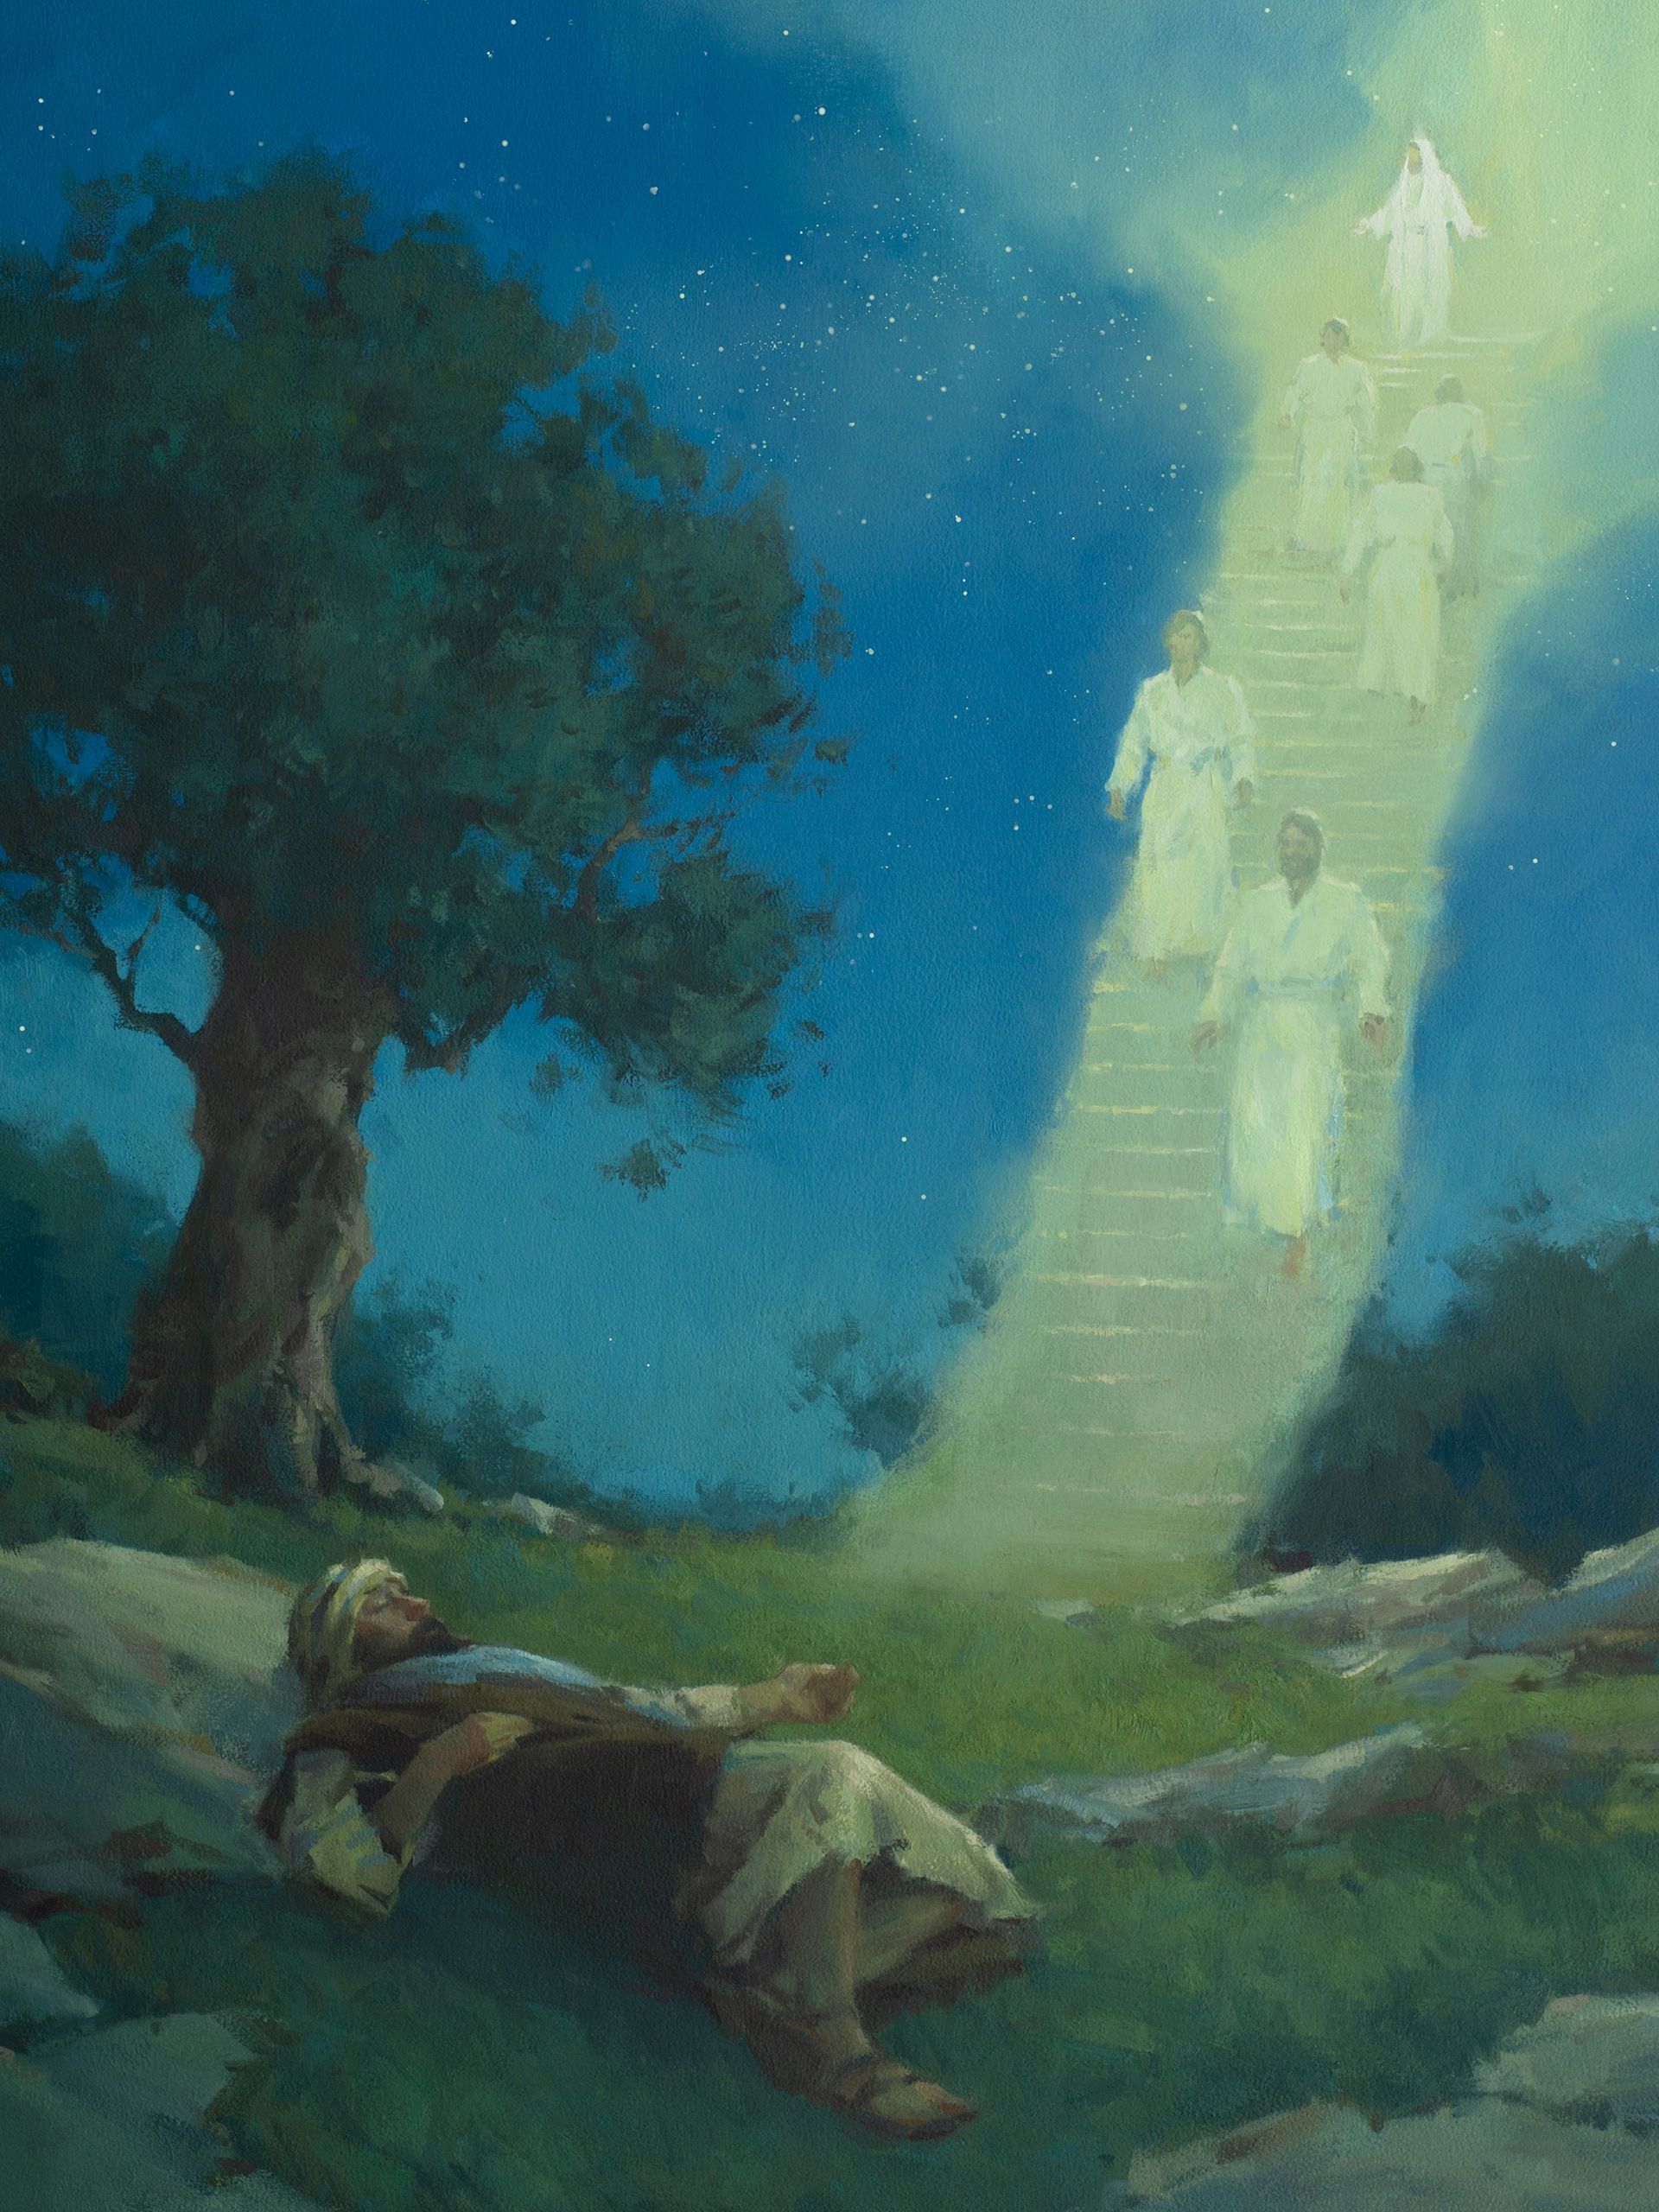 The Old Testament prophet Jacob (Israel) lying asleep under a tree. A depiction of Jacob's dream of a ladder and angels descending from heaven is portrayed in the background.